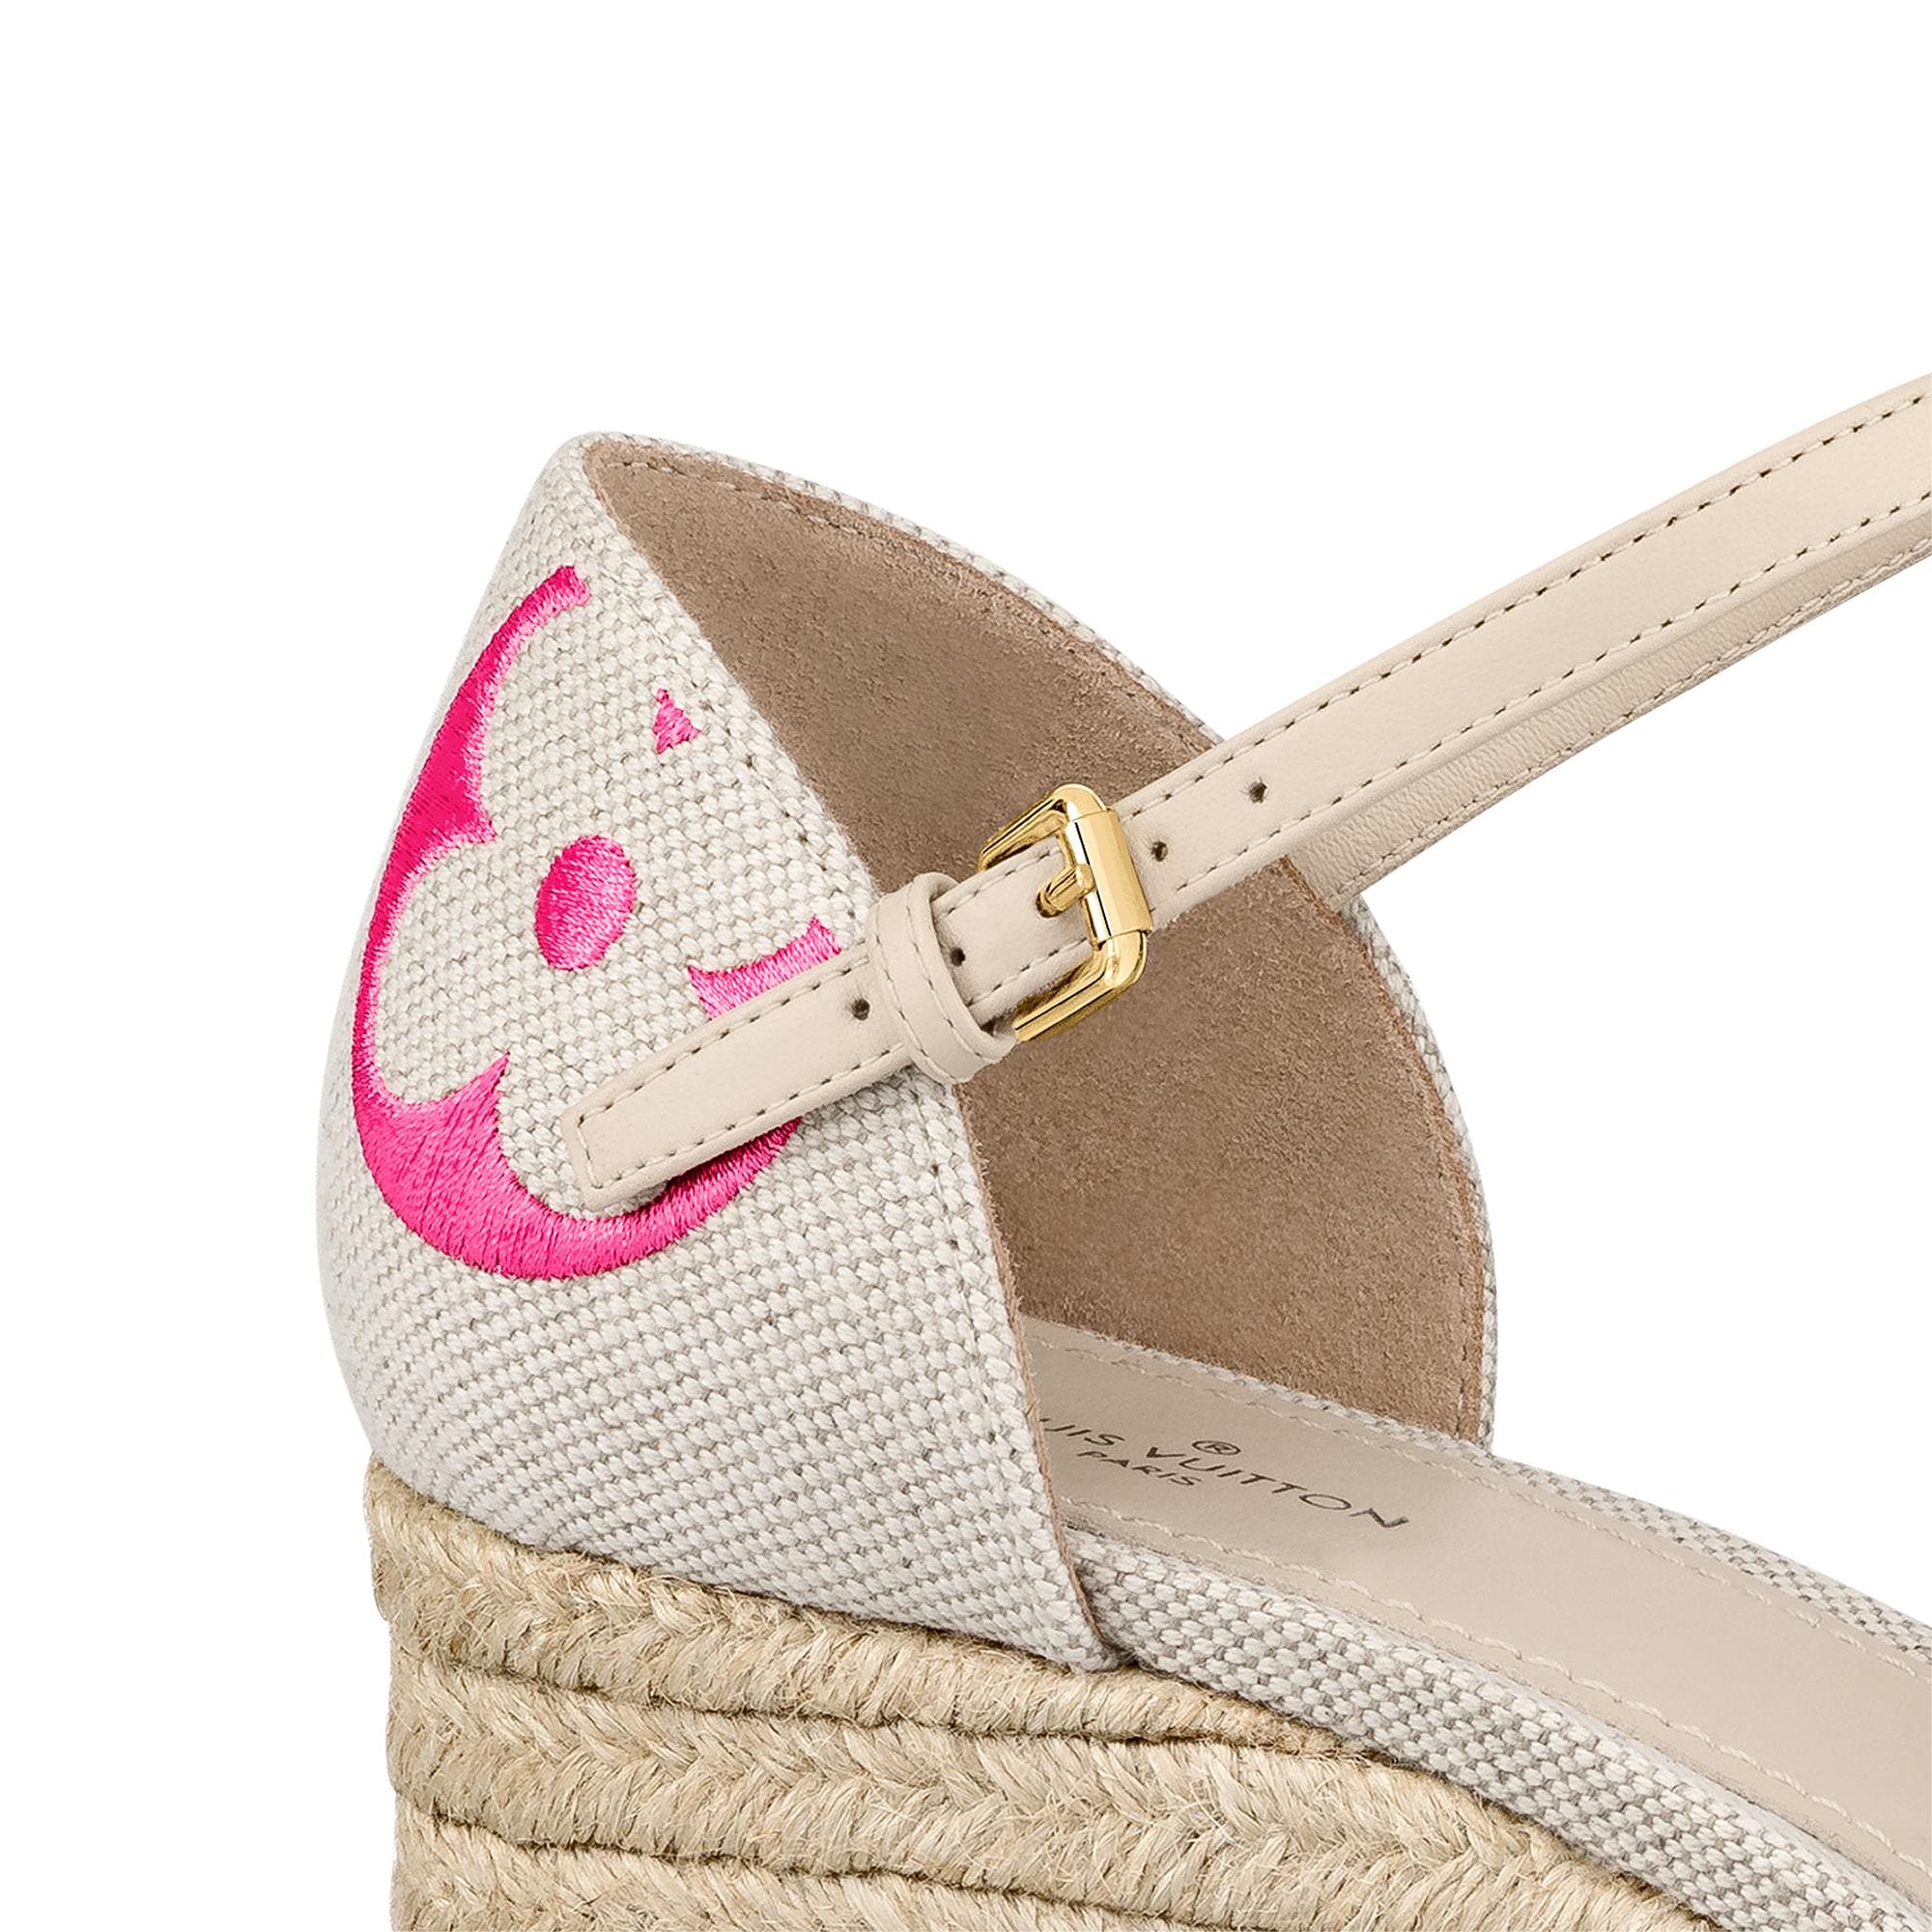 SS-22 Louis Vuitton Starboard Wedge Sandal